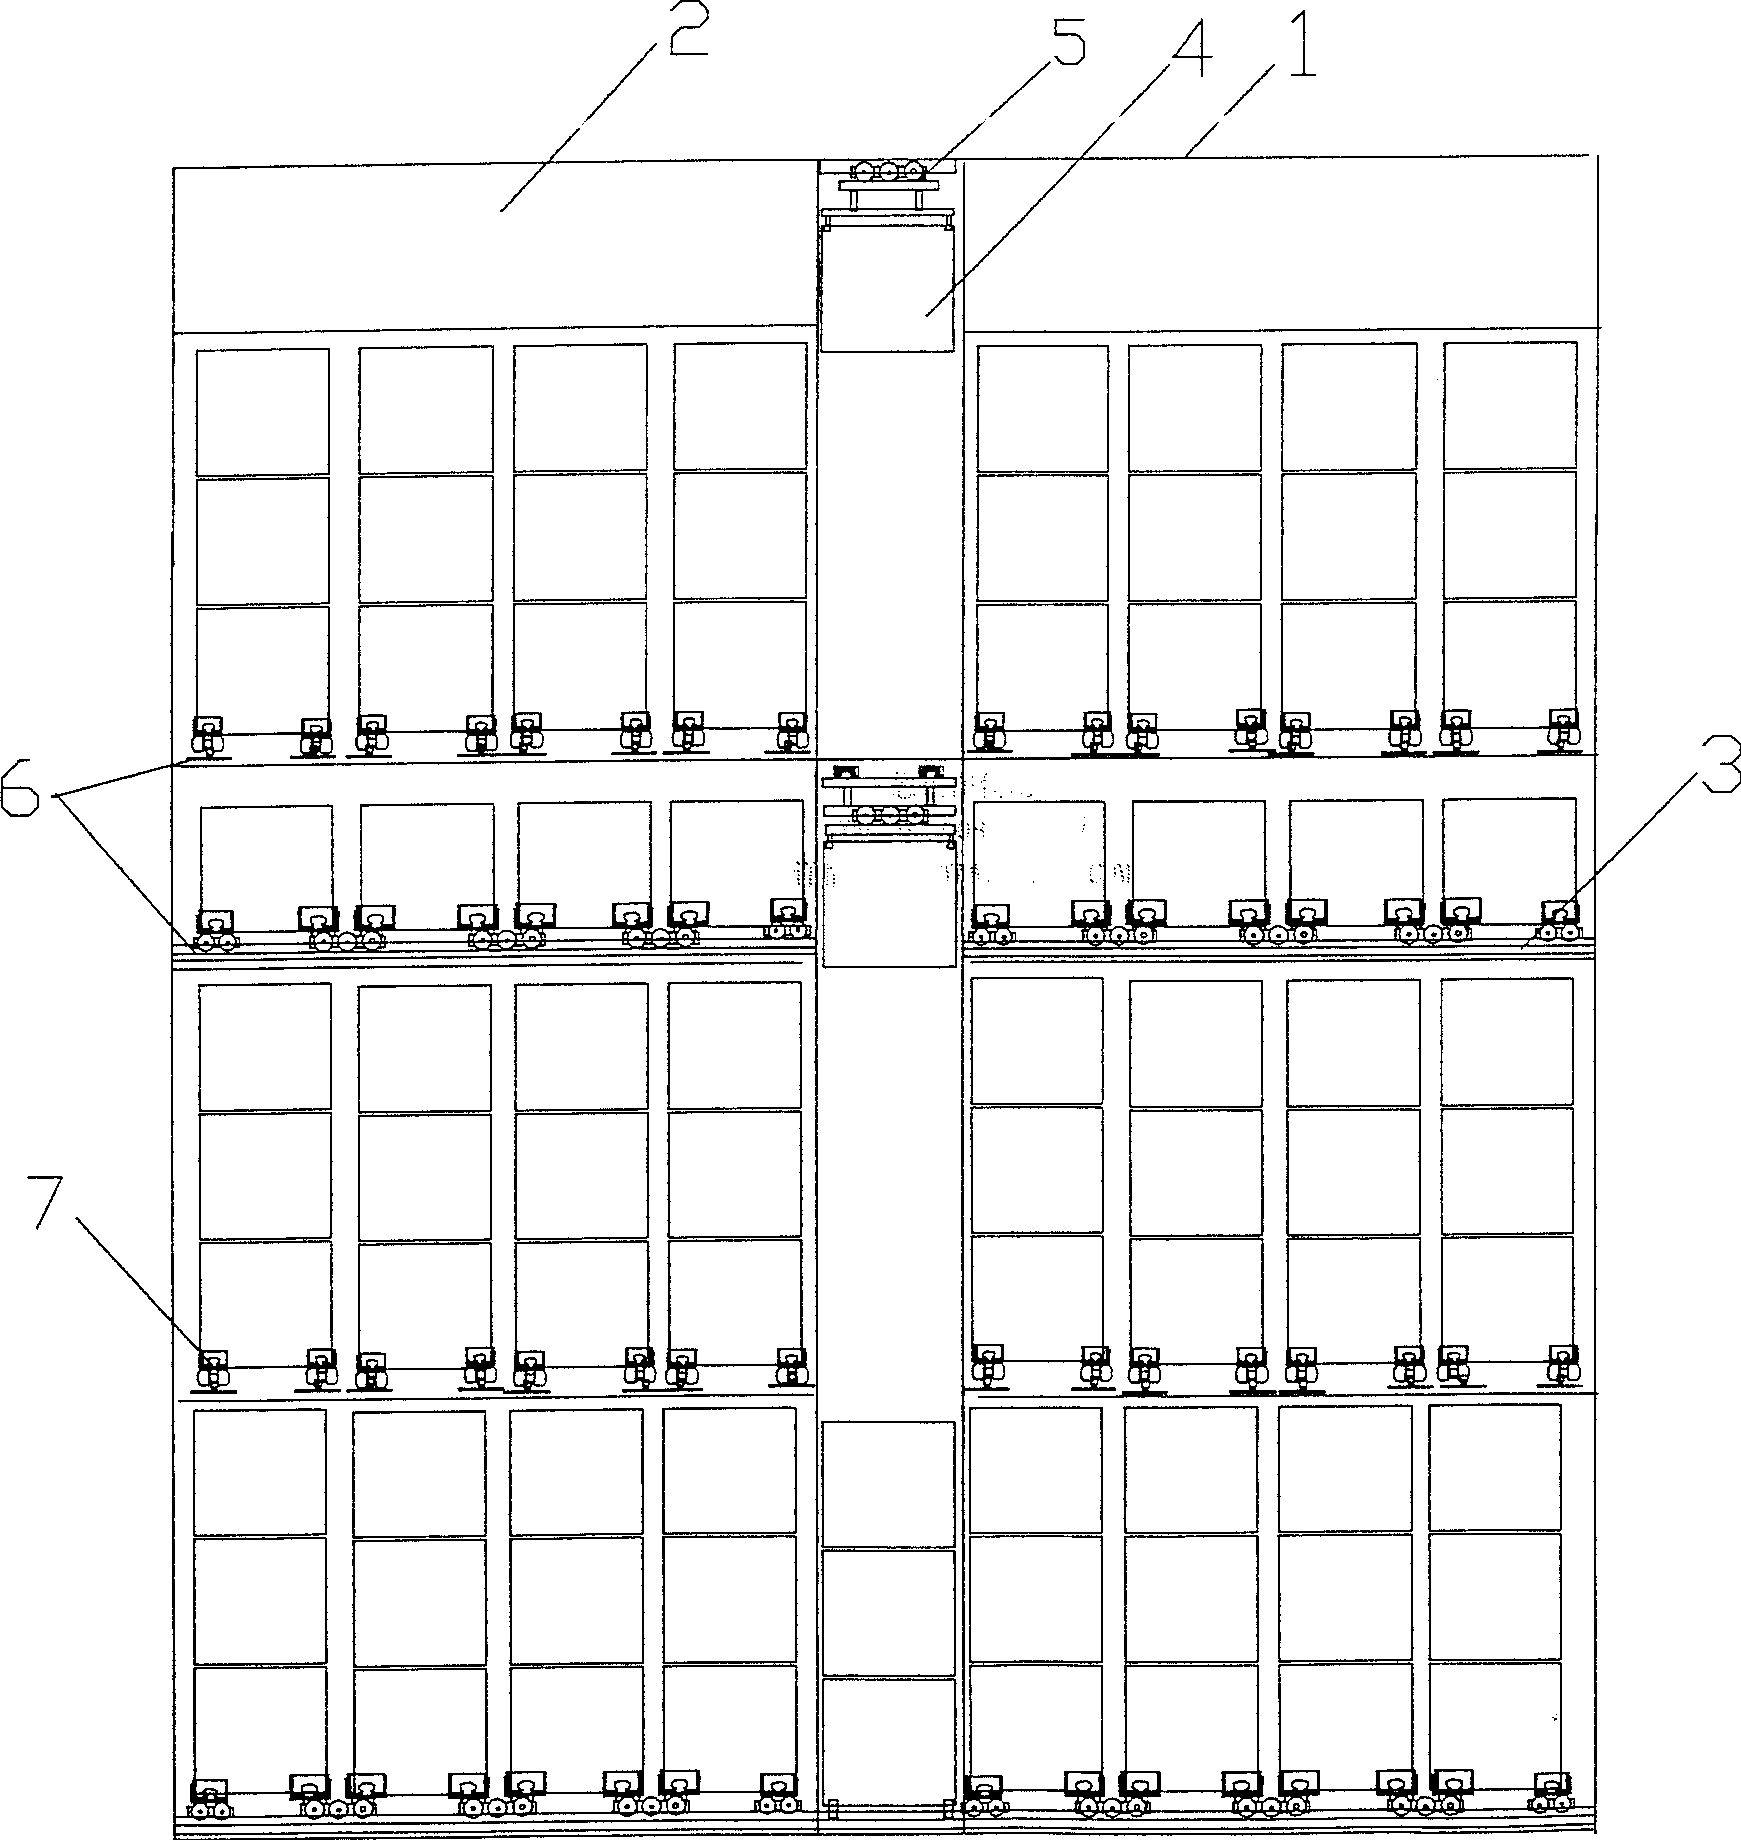 Automatized storing, loading and unloading facility for container